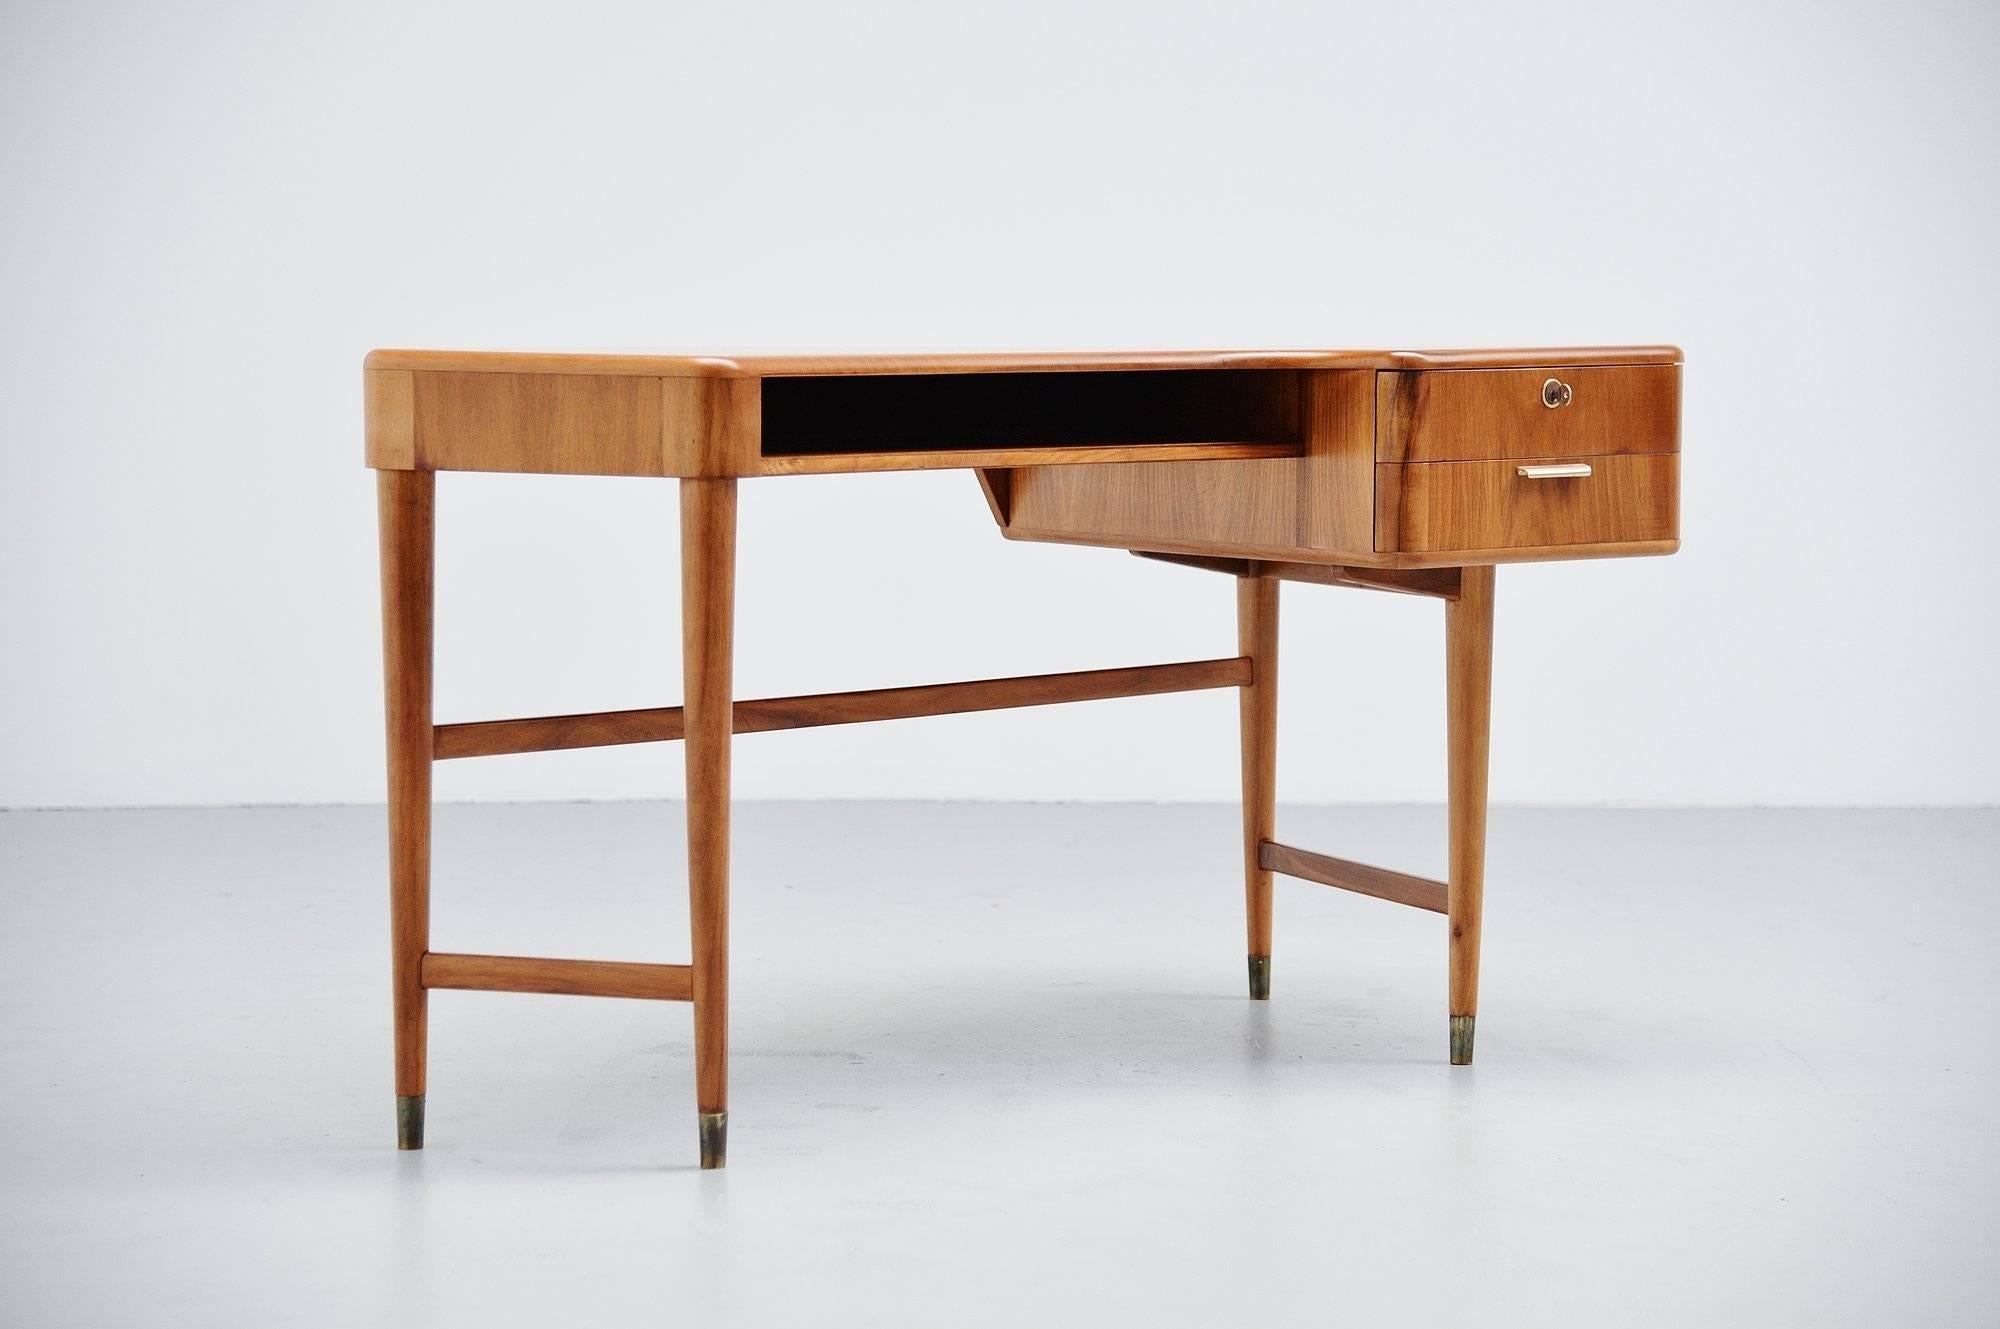 Very nice kidney shaped ladies desk designed by A.A Patij and manufactured by Zijlstra's Meubelen, Holland, 1950. This desk was made of walnut wood and has some brass details, the feet for example. In the middle there is an open storage space and on